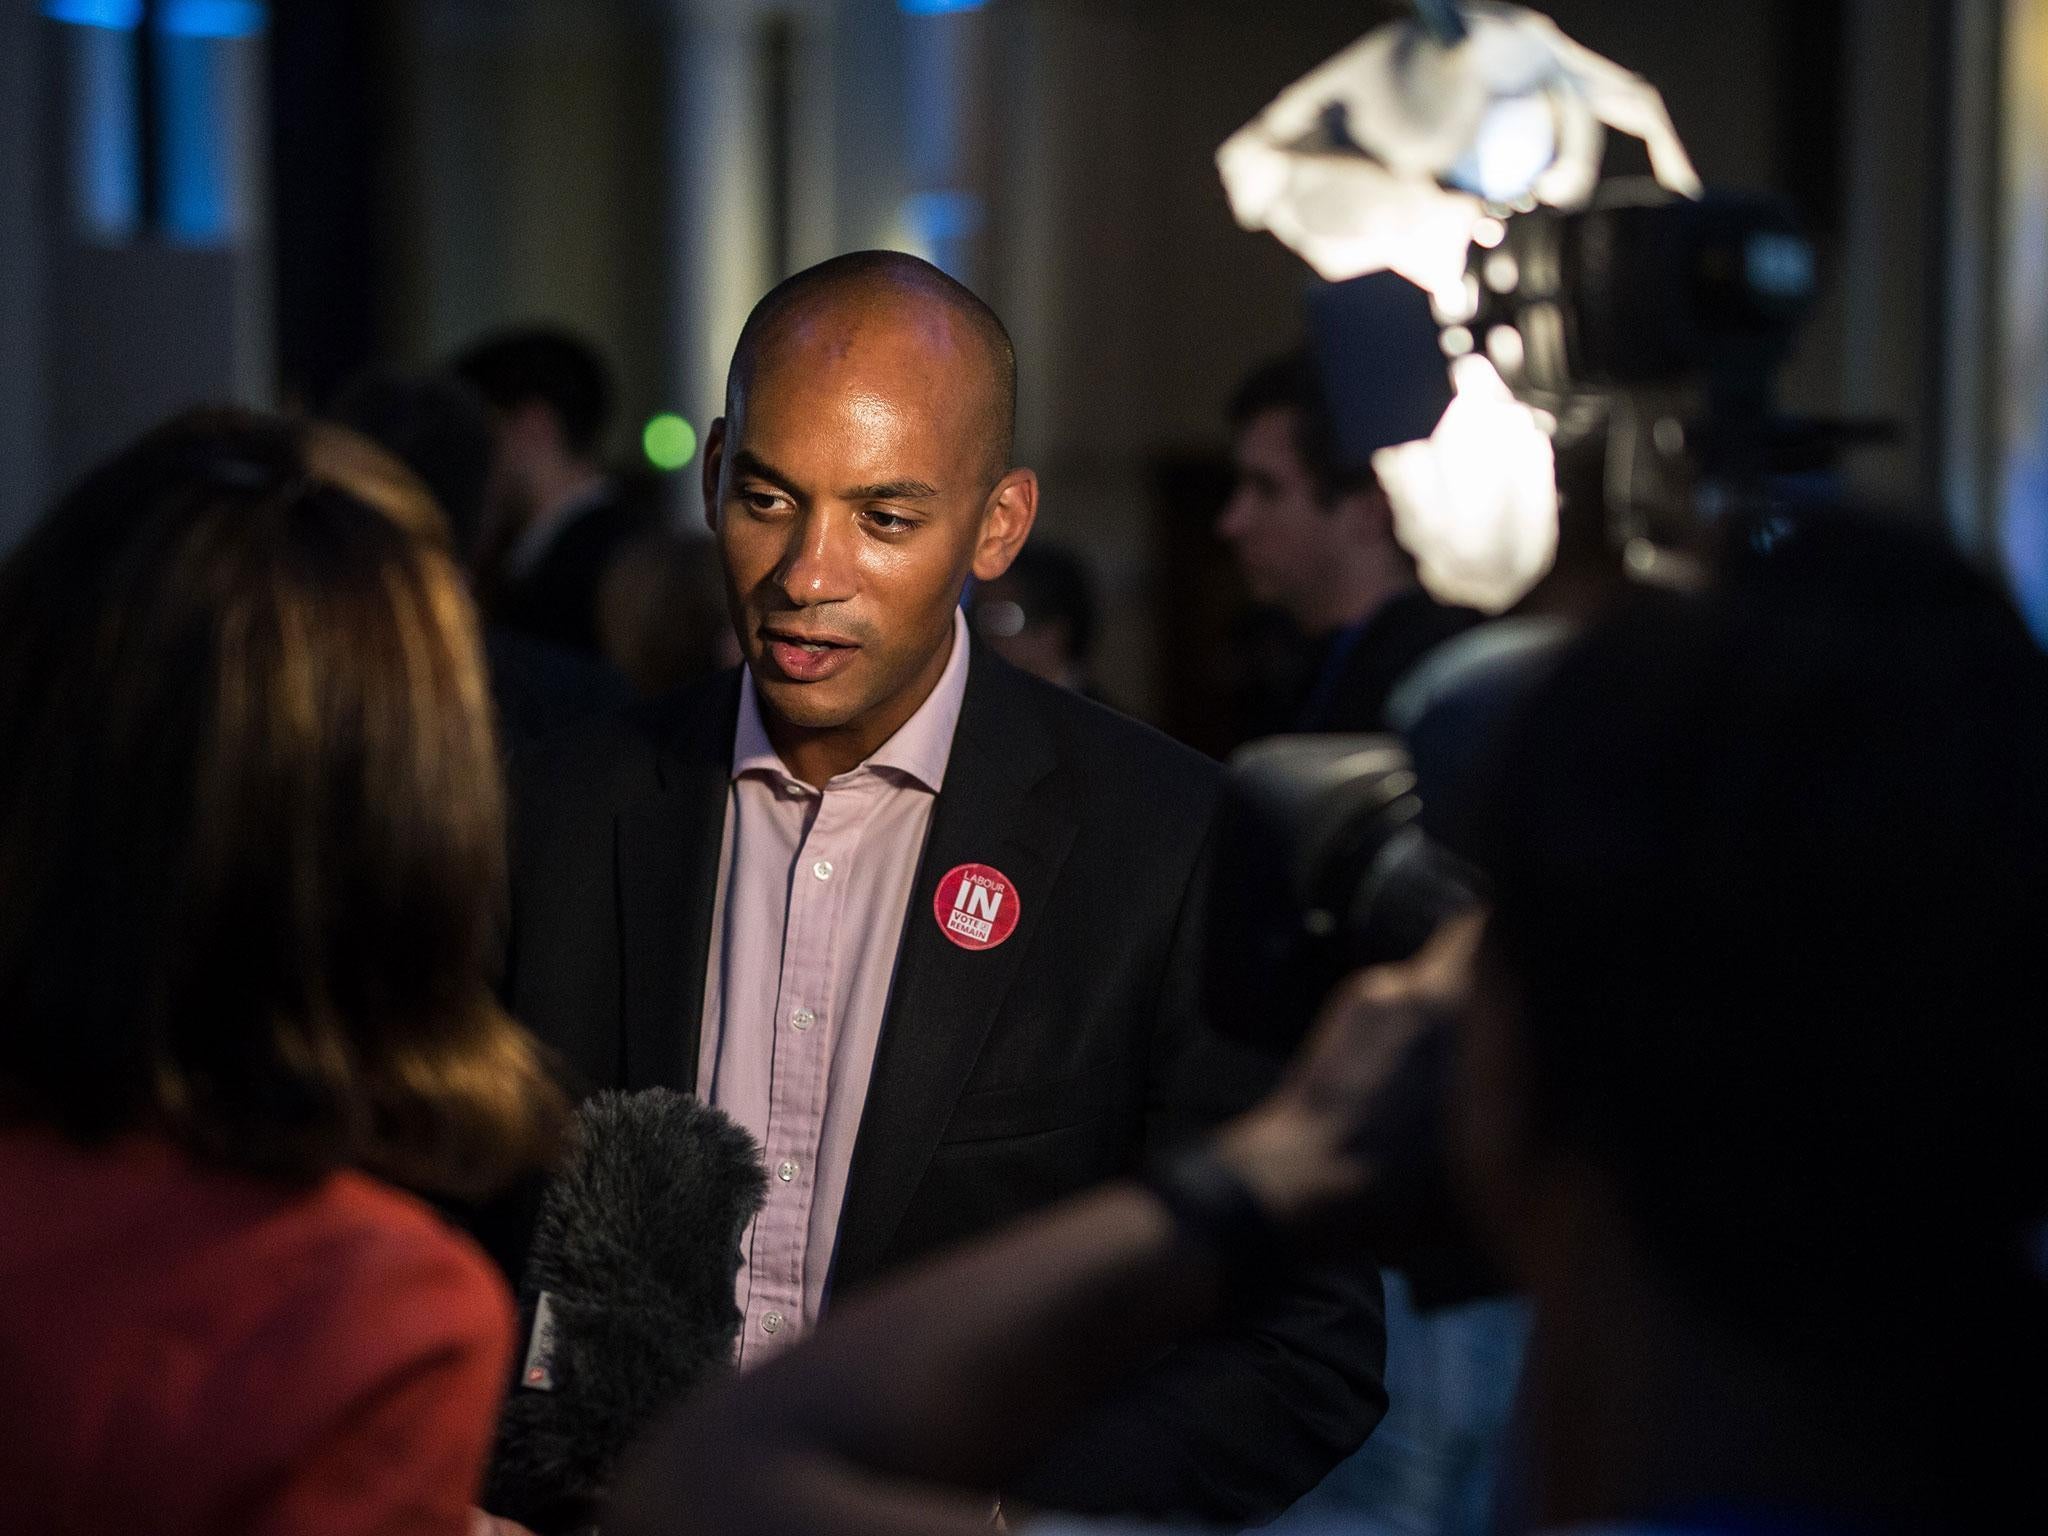 Shadow Business Secretary Chuka Umunna described the Brexit vote as a "wake-up call" – twice